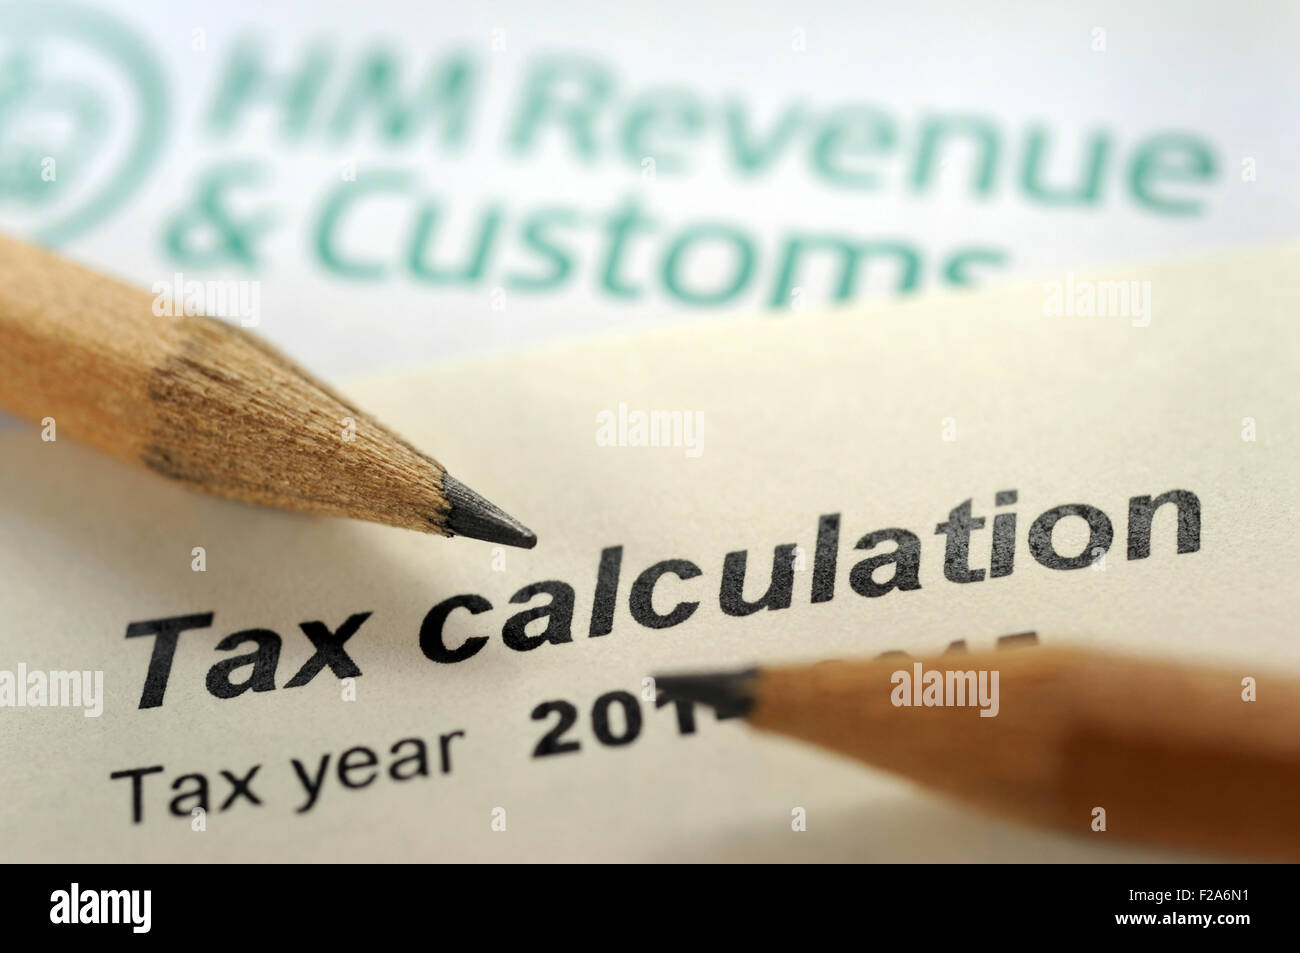 HMRC TAX CALCULATION LETTER WITH PENCILS RE INCOME SELF ASSESSMENT EMPLOYMENT AVOIDANCE HM REVENUE CUSTOMS TAXES FORM OWED UK Stock Photo